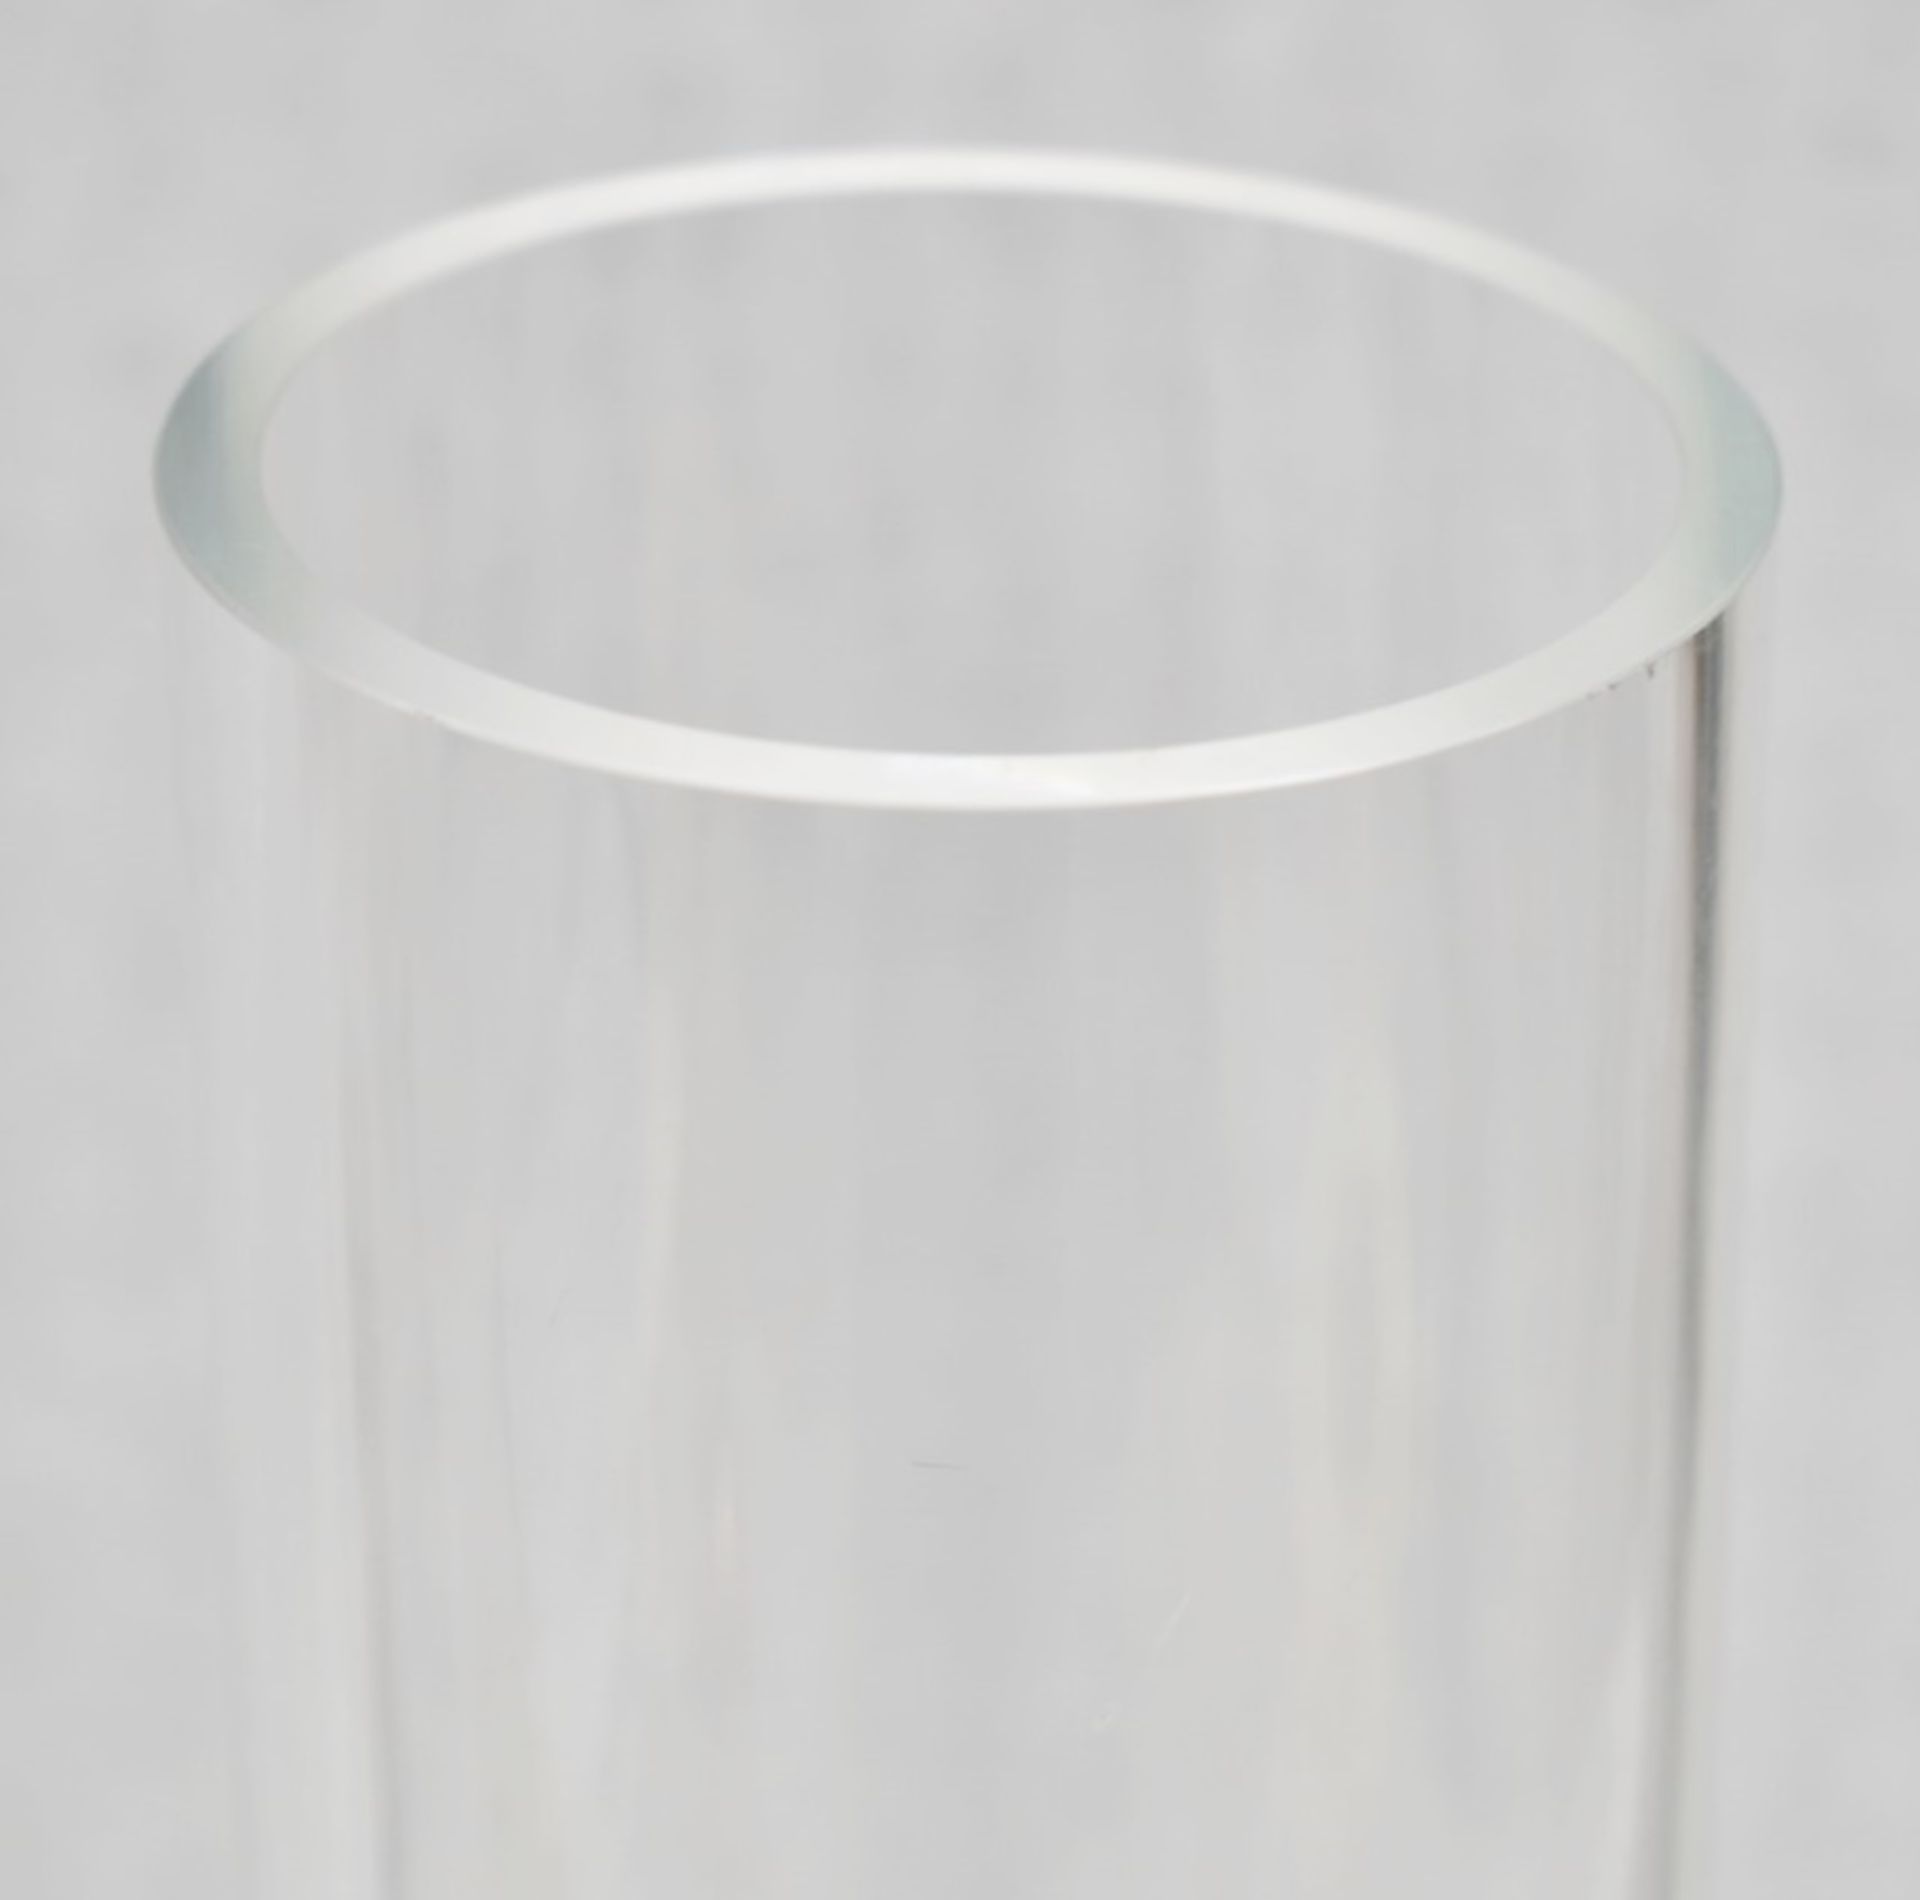 2 x KENNETH TURNER Designer Clear Glass Hand-crafted Vases - Ref: CNT763+764/WH2/C23 - CL845 - NO - Image 2 of 3